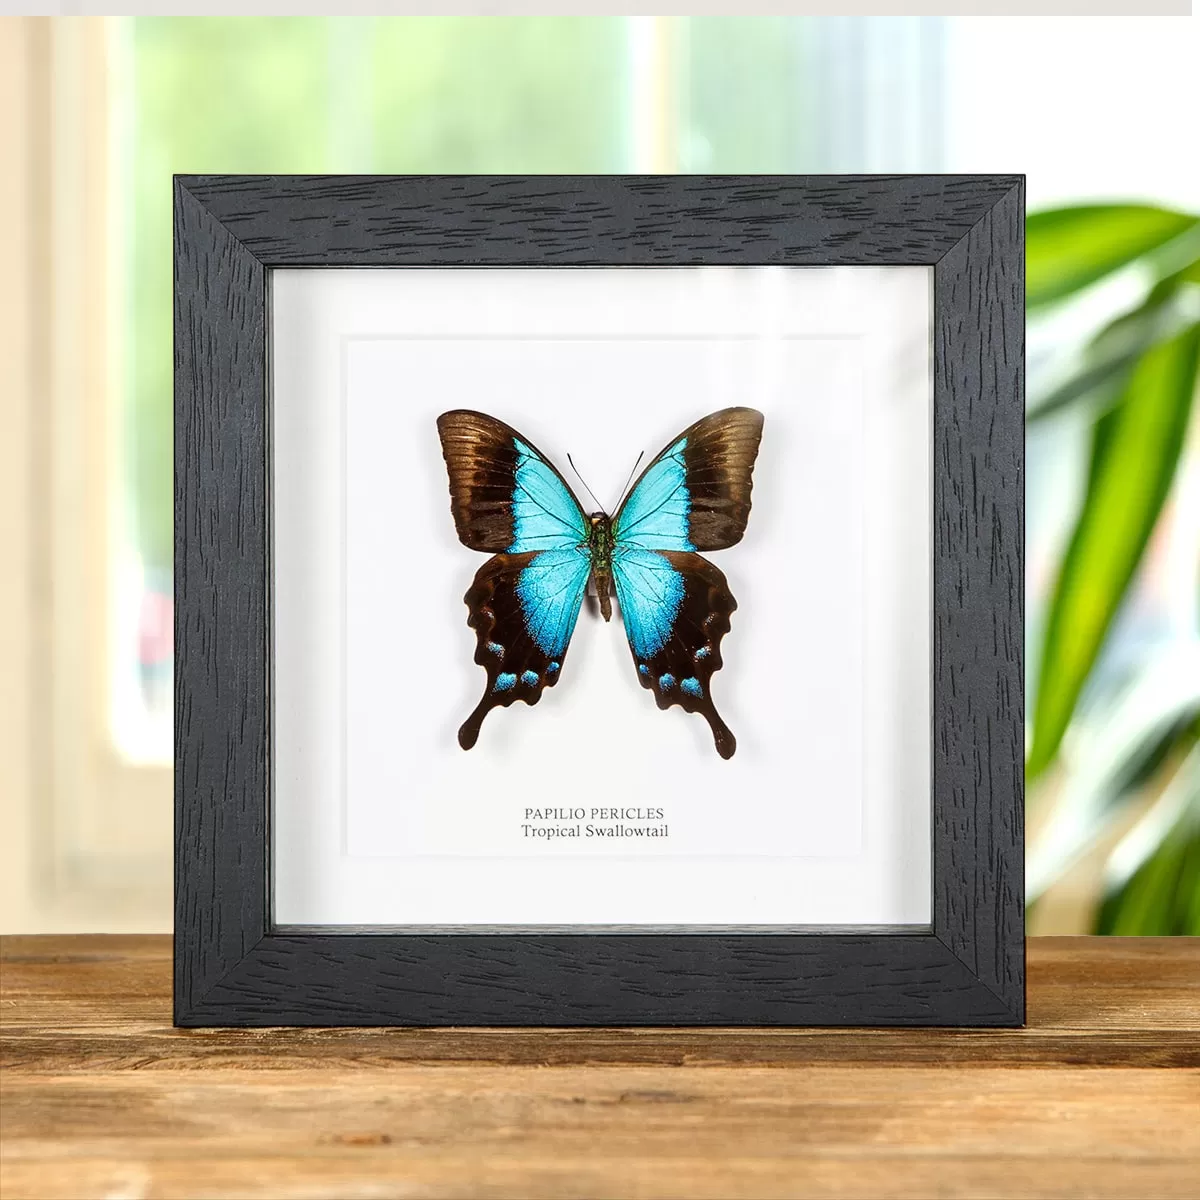 Minibeast Tropical Swallowtail Butterfly In Box Frame (Papilio pericles)